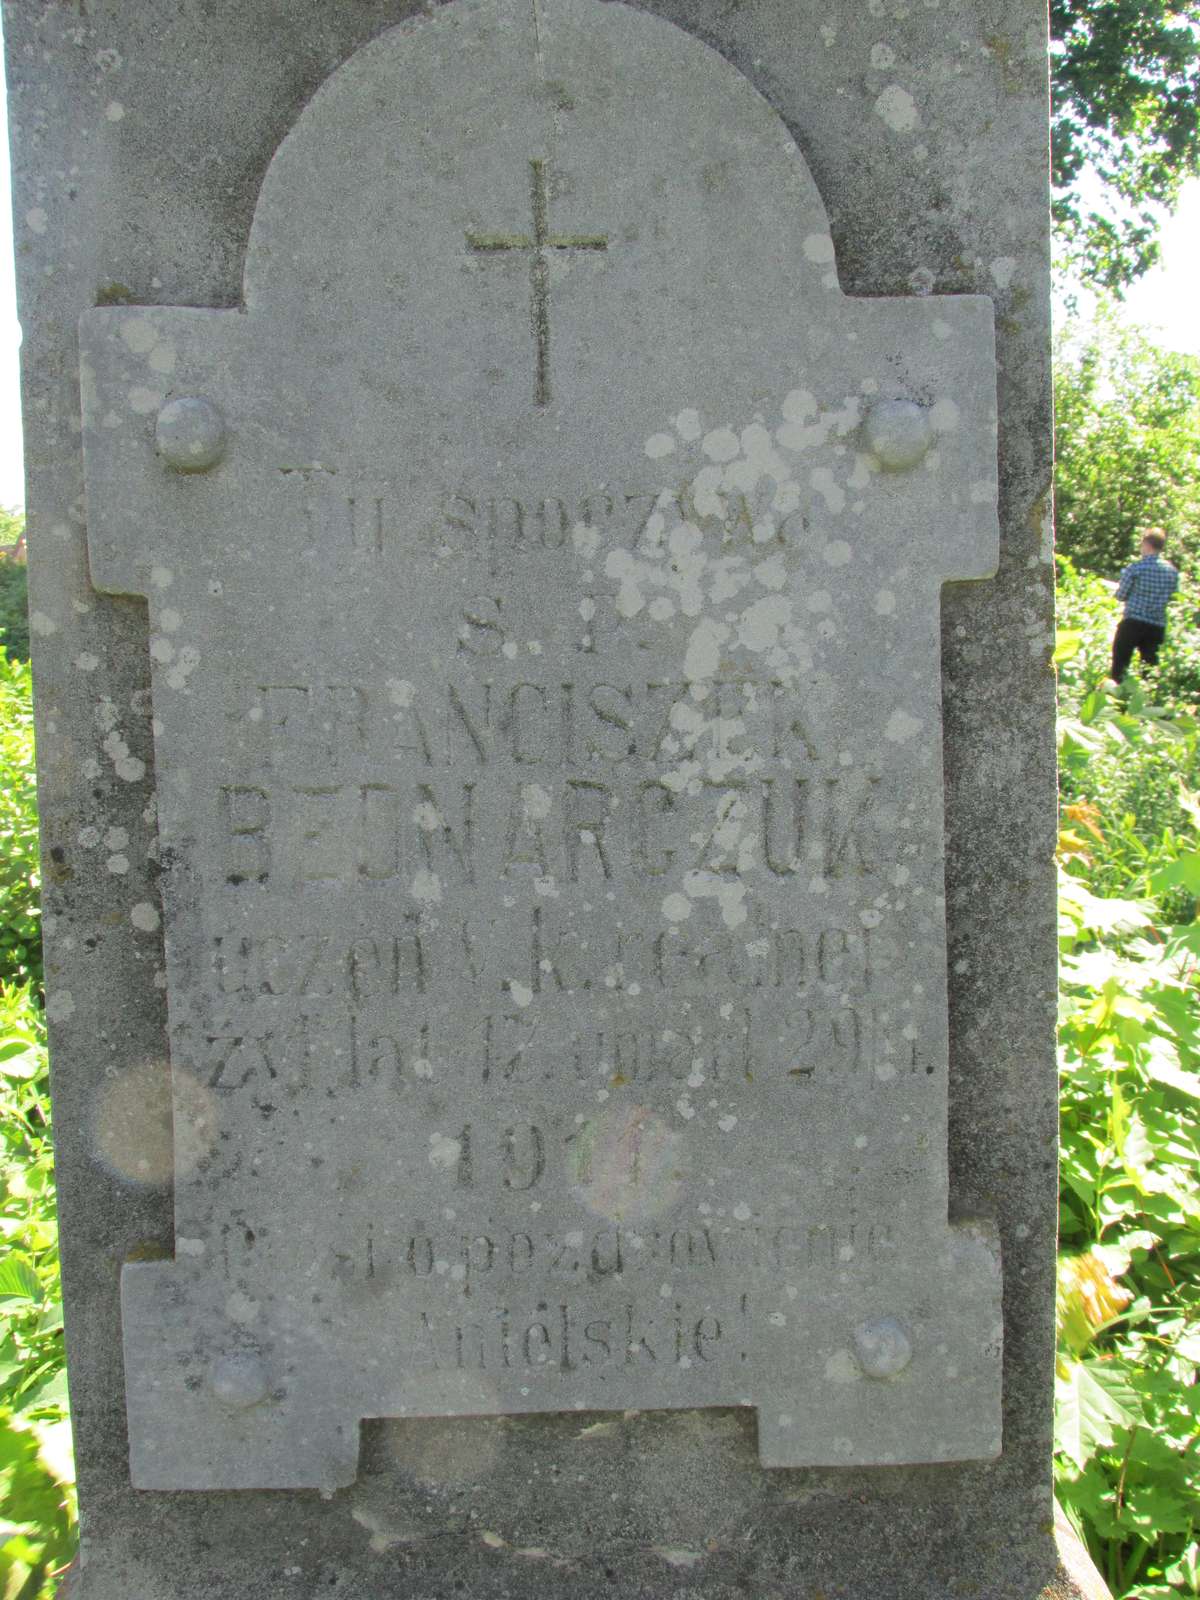 Fragment of a tombstone of Franciszek Bednarczuk, cemetery in Borki Wielkie